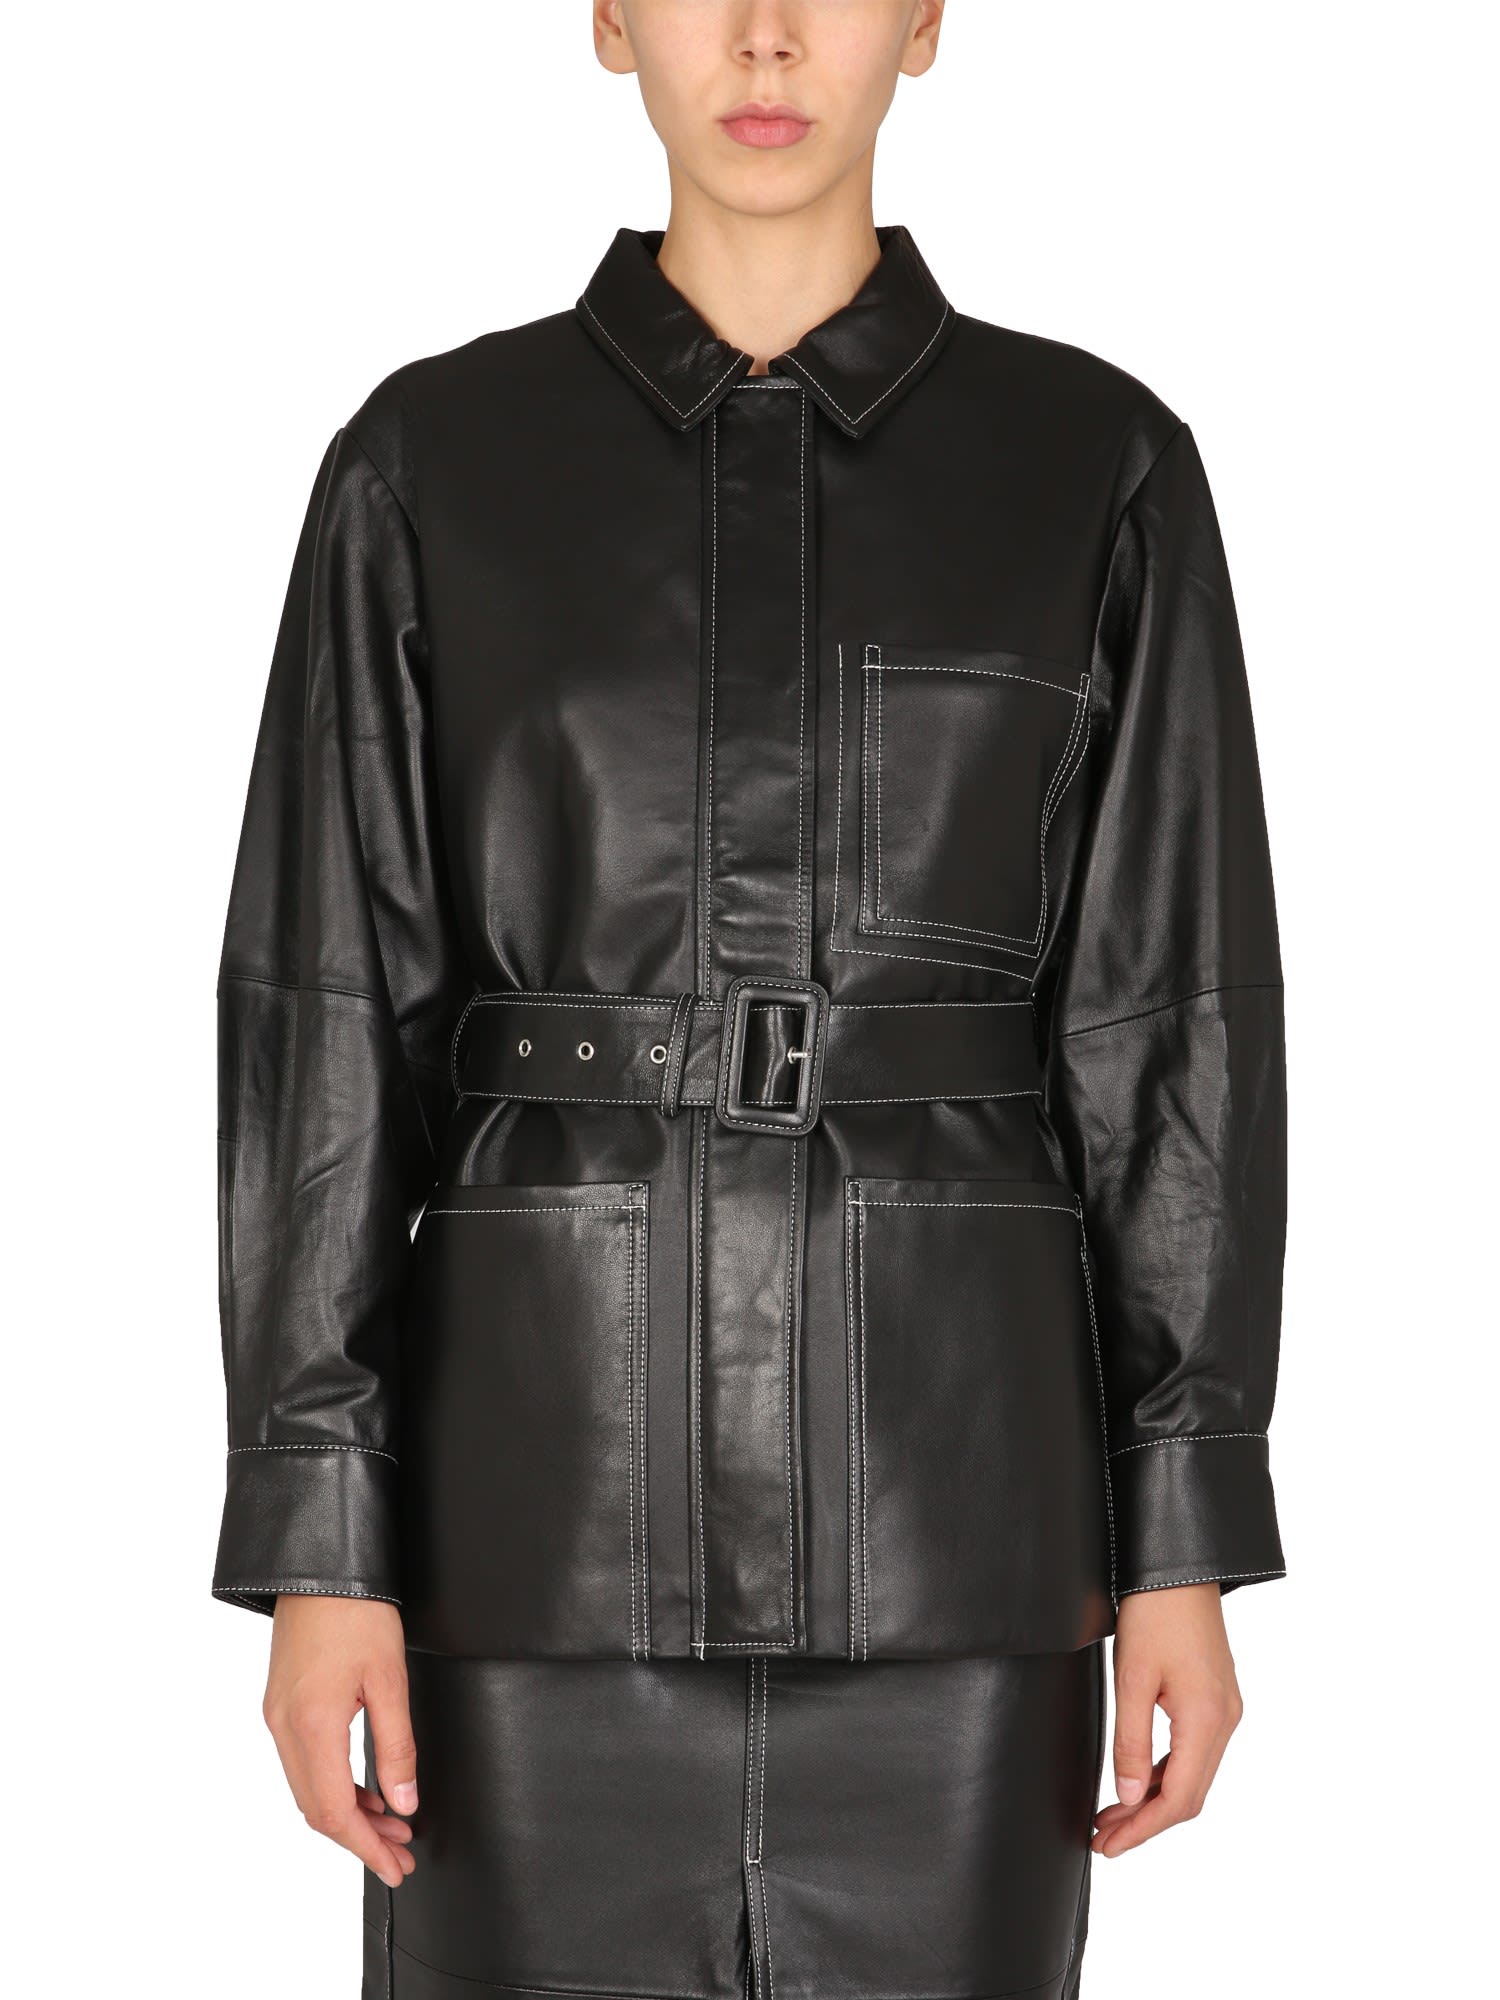 Proenza Schouler White Label Nappa Leather Jacket